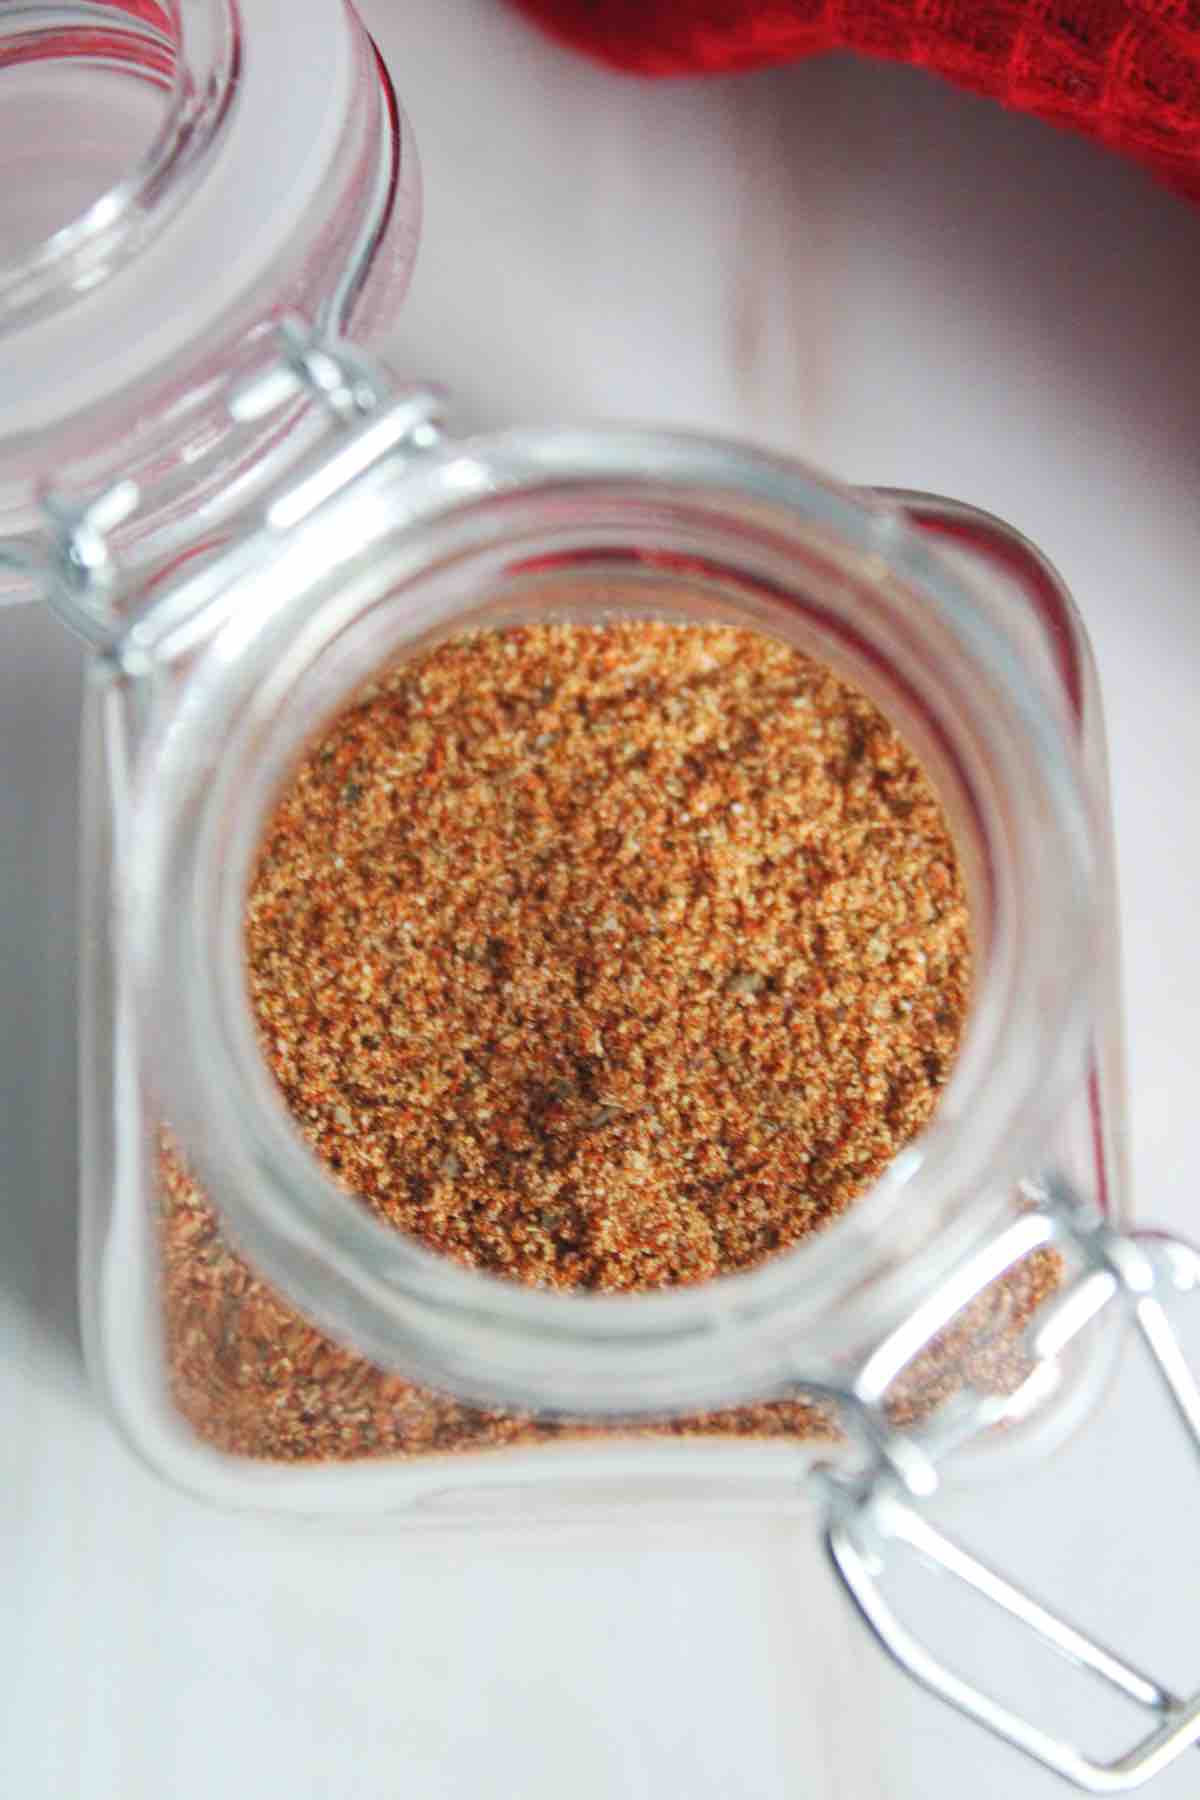 This KFC spice blend copycat recipe contains the secret 11 herbs and spices used to make fried chicken at the Kentucky Fried Chicken restaurant chain.